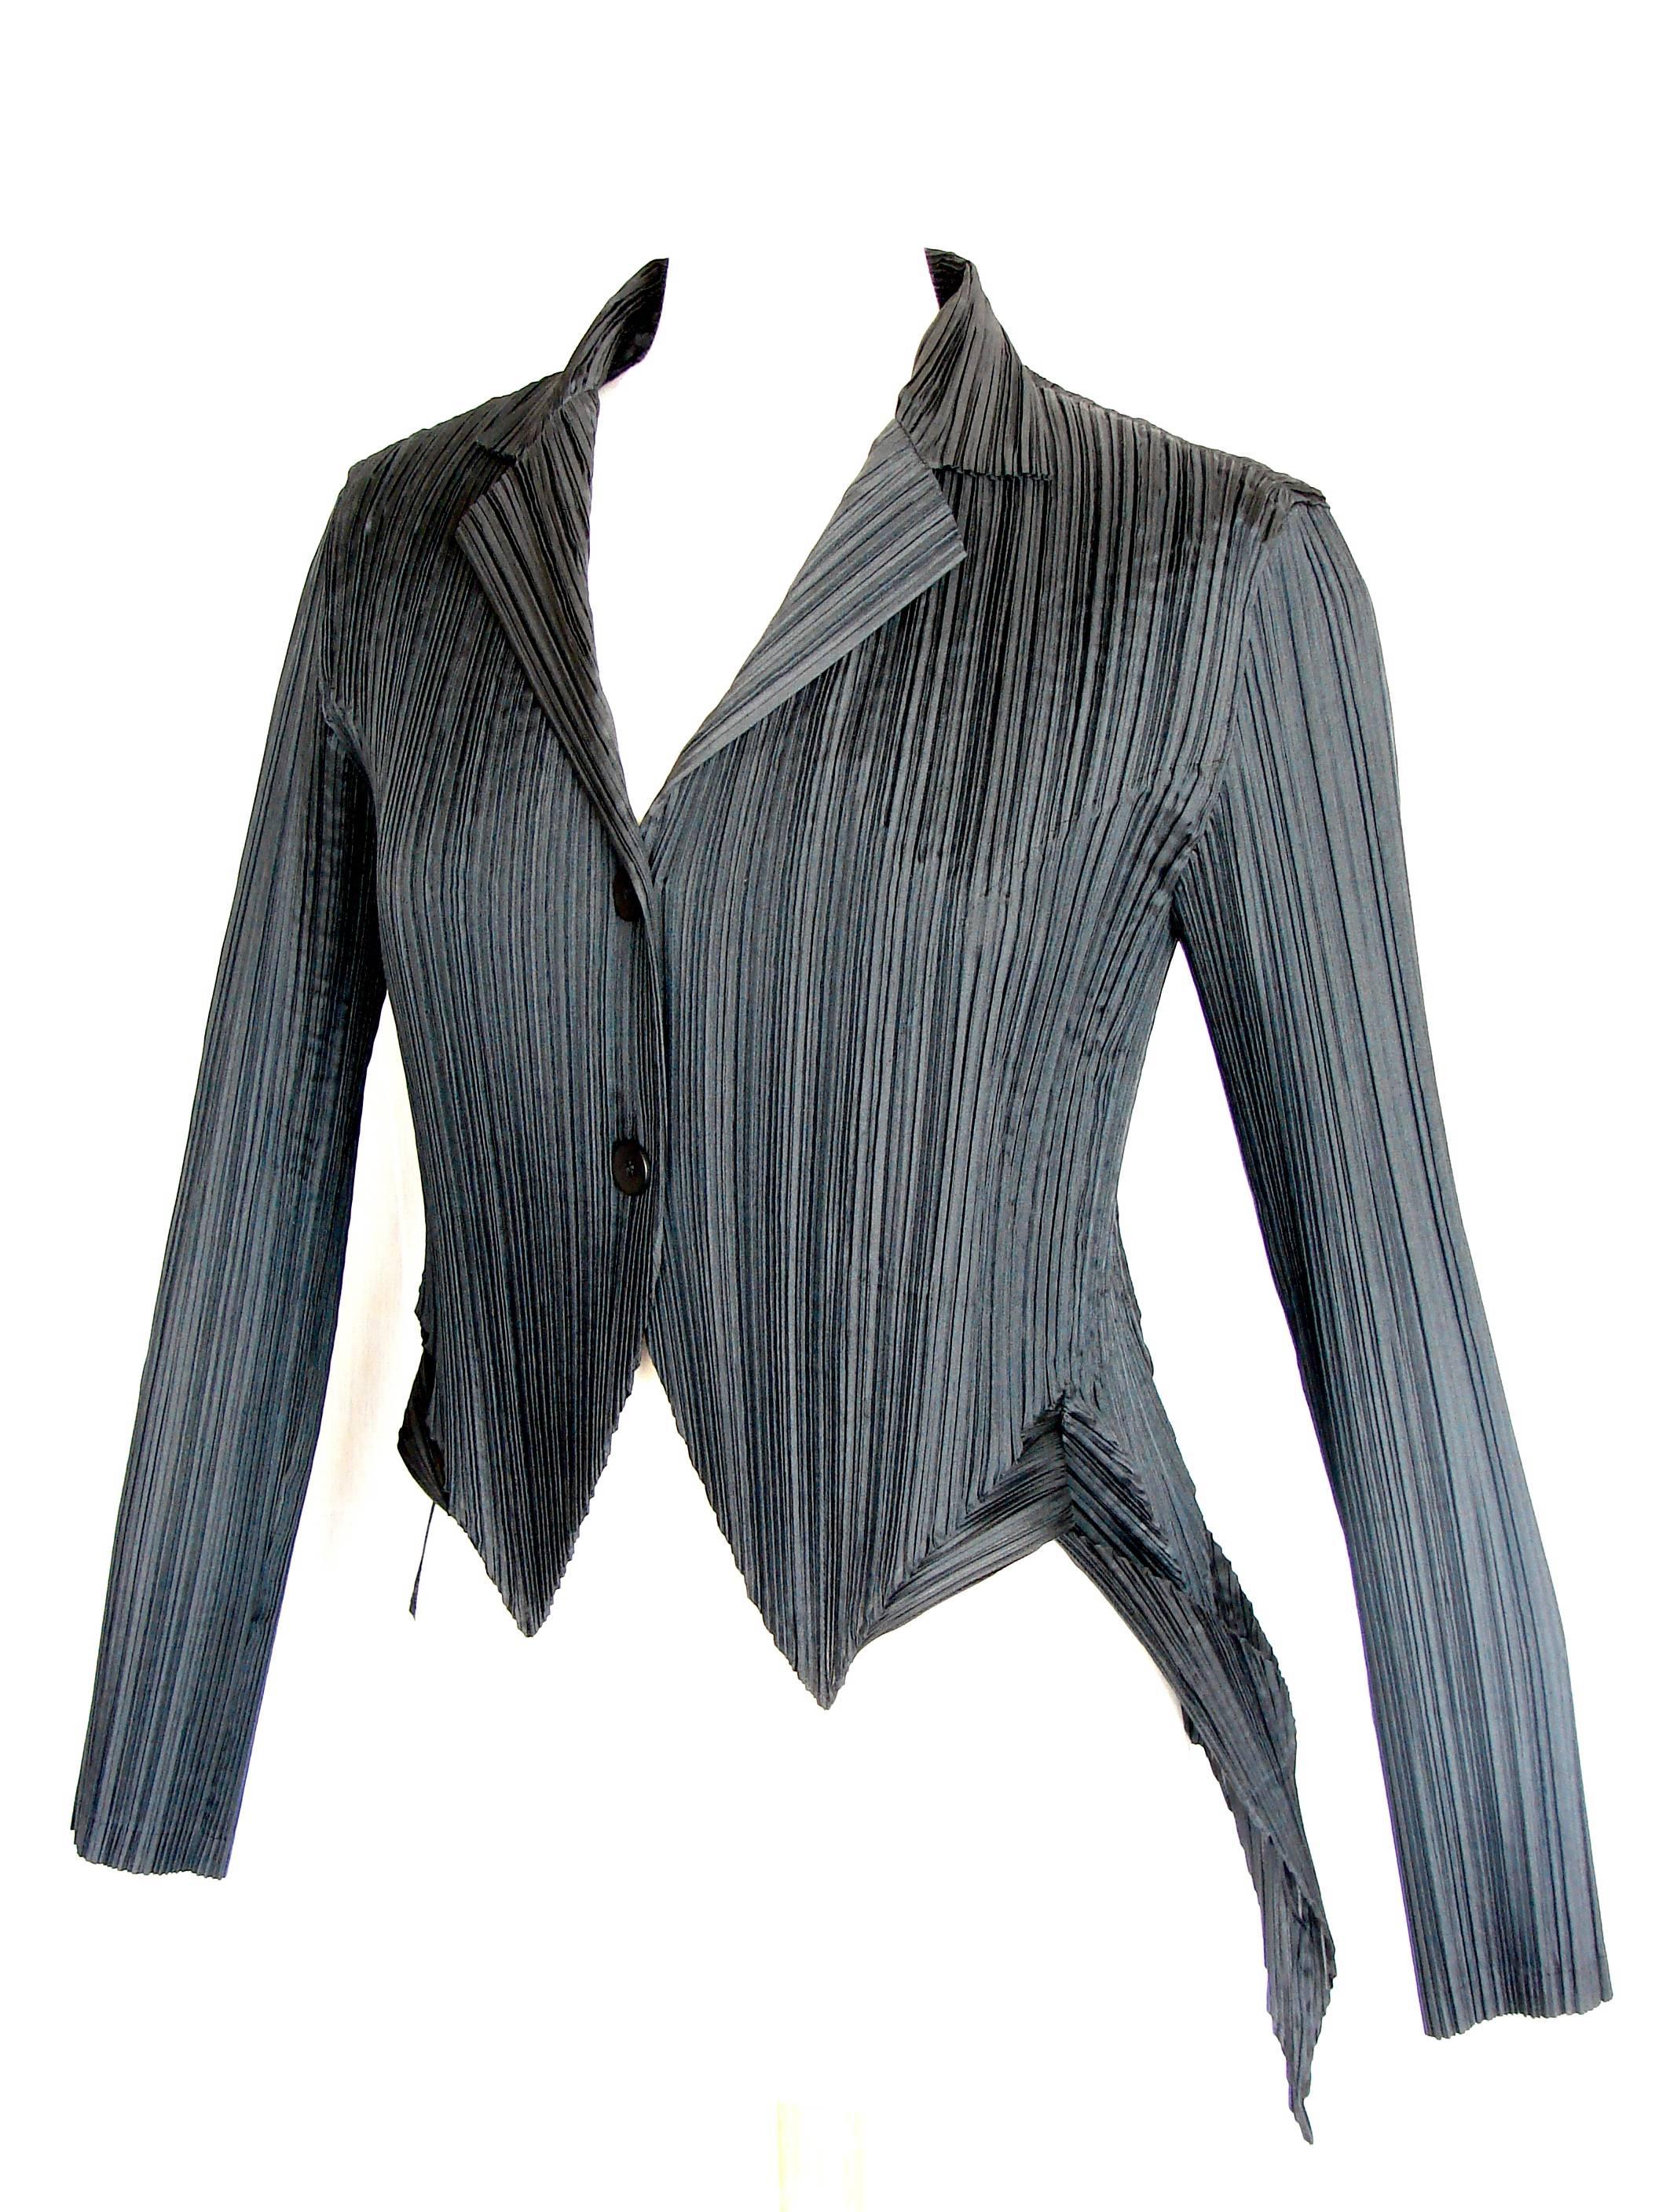 Issey Miyake Black Pleated Jacket with Pointed Tails Architectural Sz 3 1